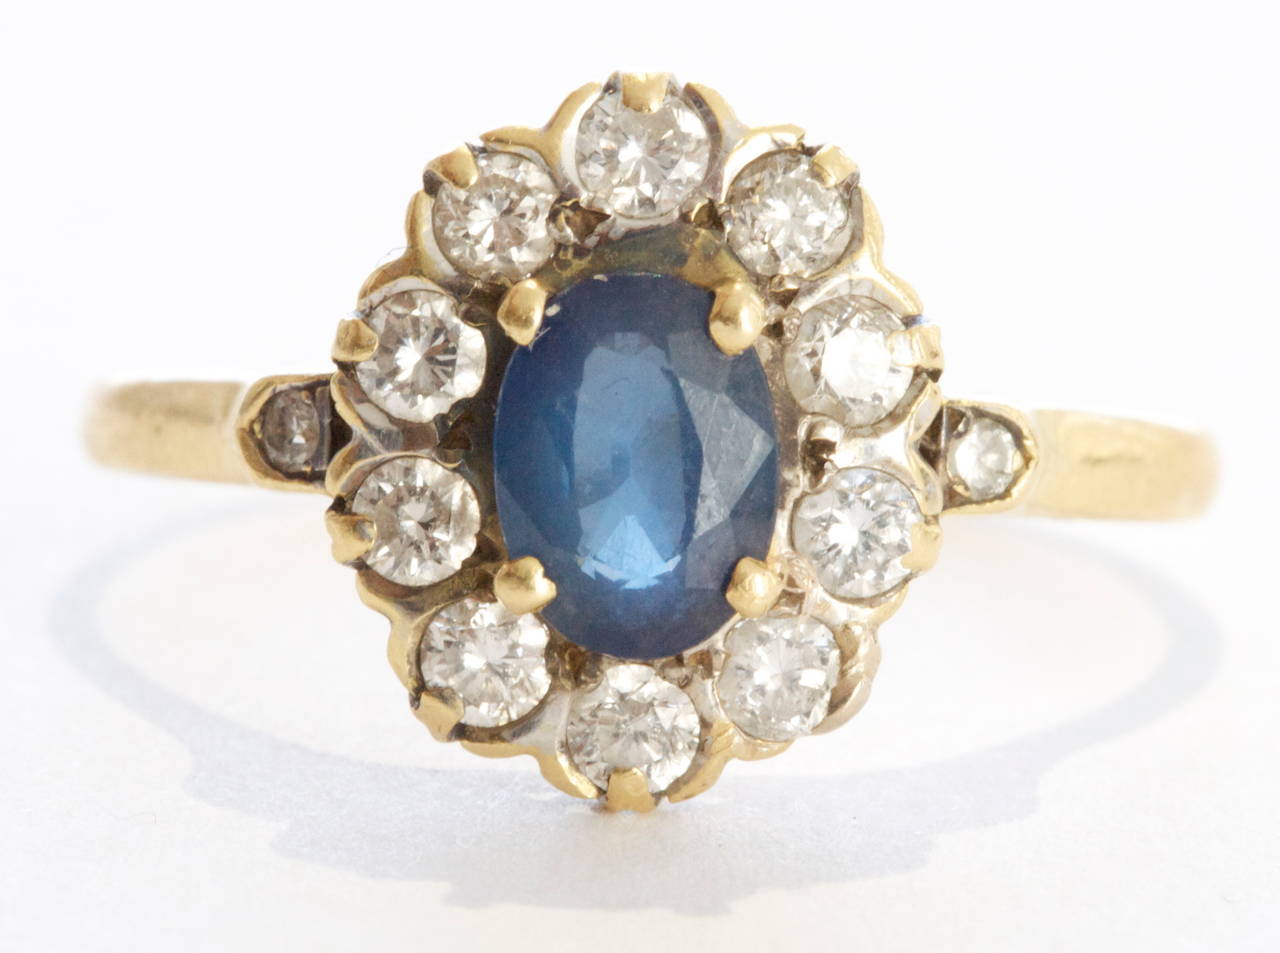 A charming Belle Epoque Sapphire Diamond halo engagement ring. The center blue sapphire weighs approximately 1.50 carats and is surrounded by a halo of white old cut diamonds. Crafted in 18k gold with French hallmarks.

Size 7 1/2 and can be